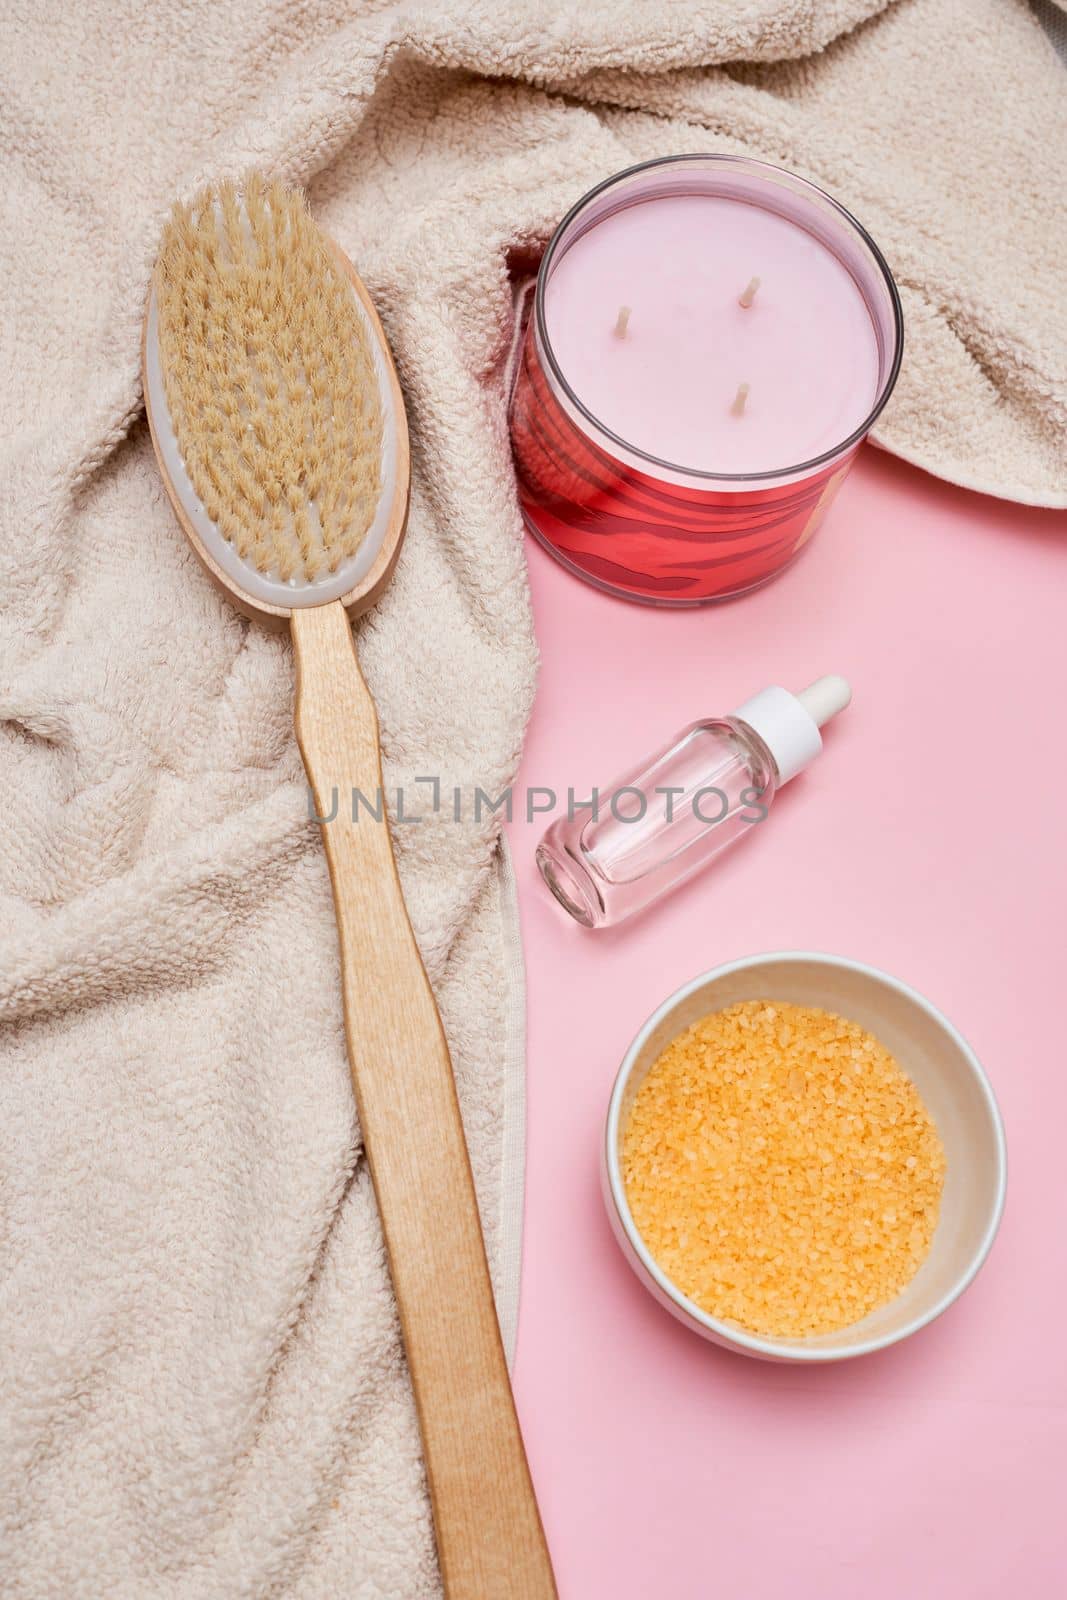 the contents of a hairbrush, bowl and brush on a pink surface with a white towel next to it